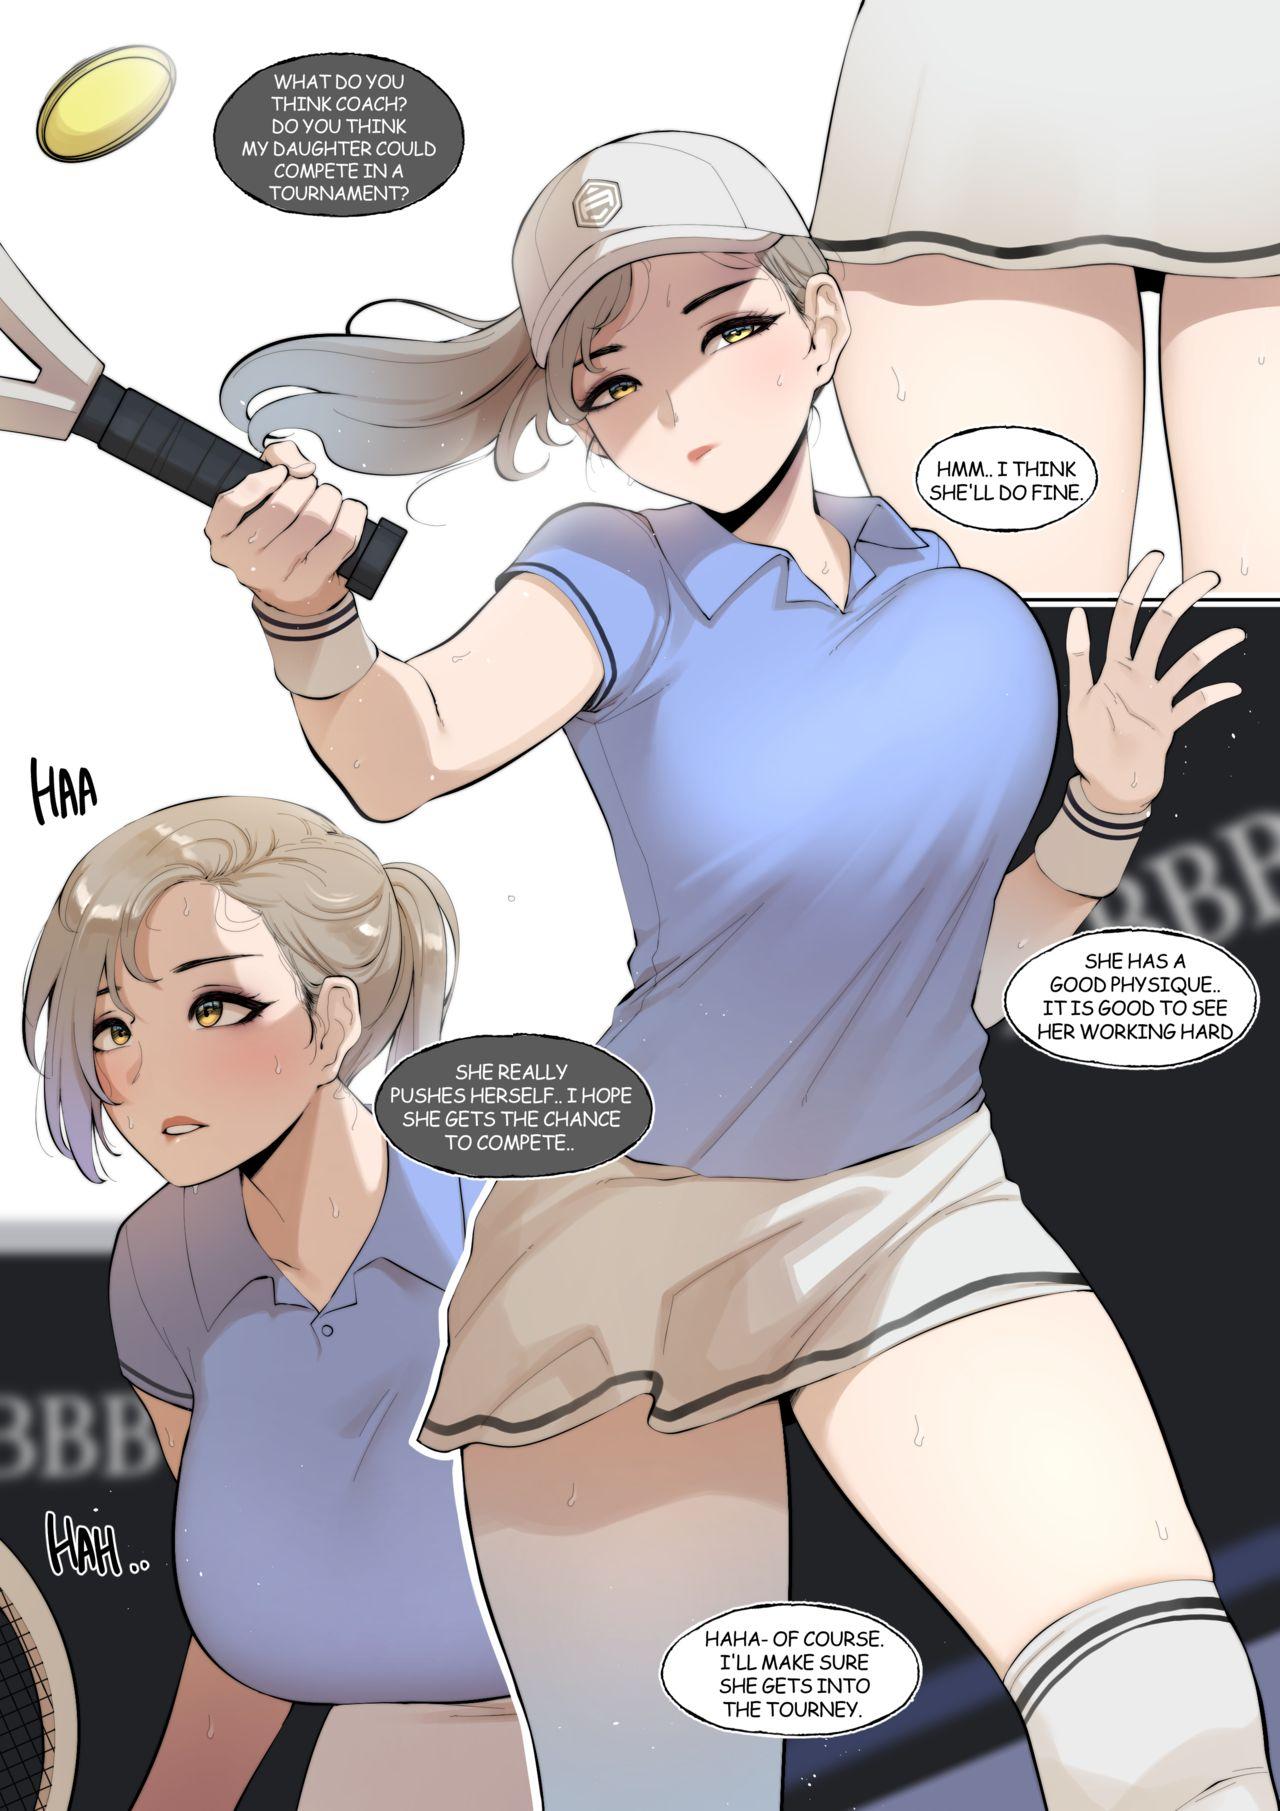 Woman Fucking It's Normal for us to Have Sex if You Lose Right? Tennis edition - Original Fisting - Picture 2